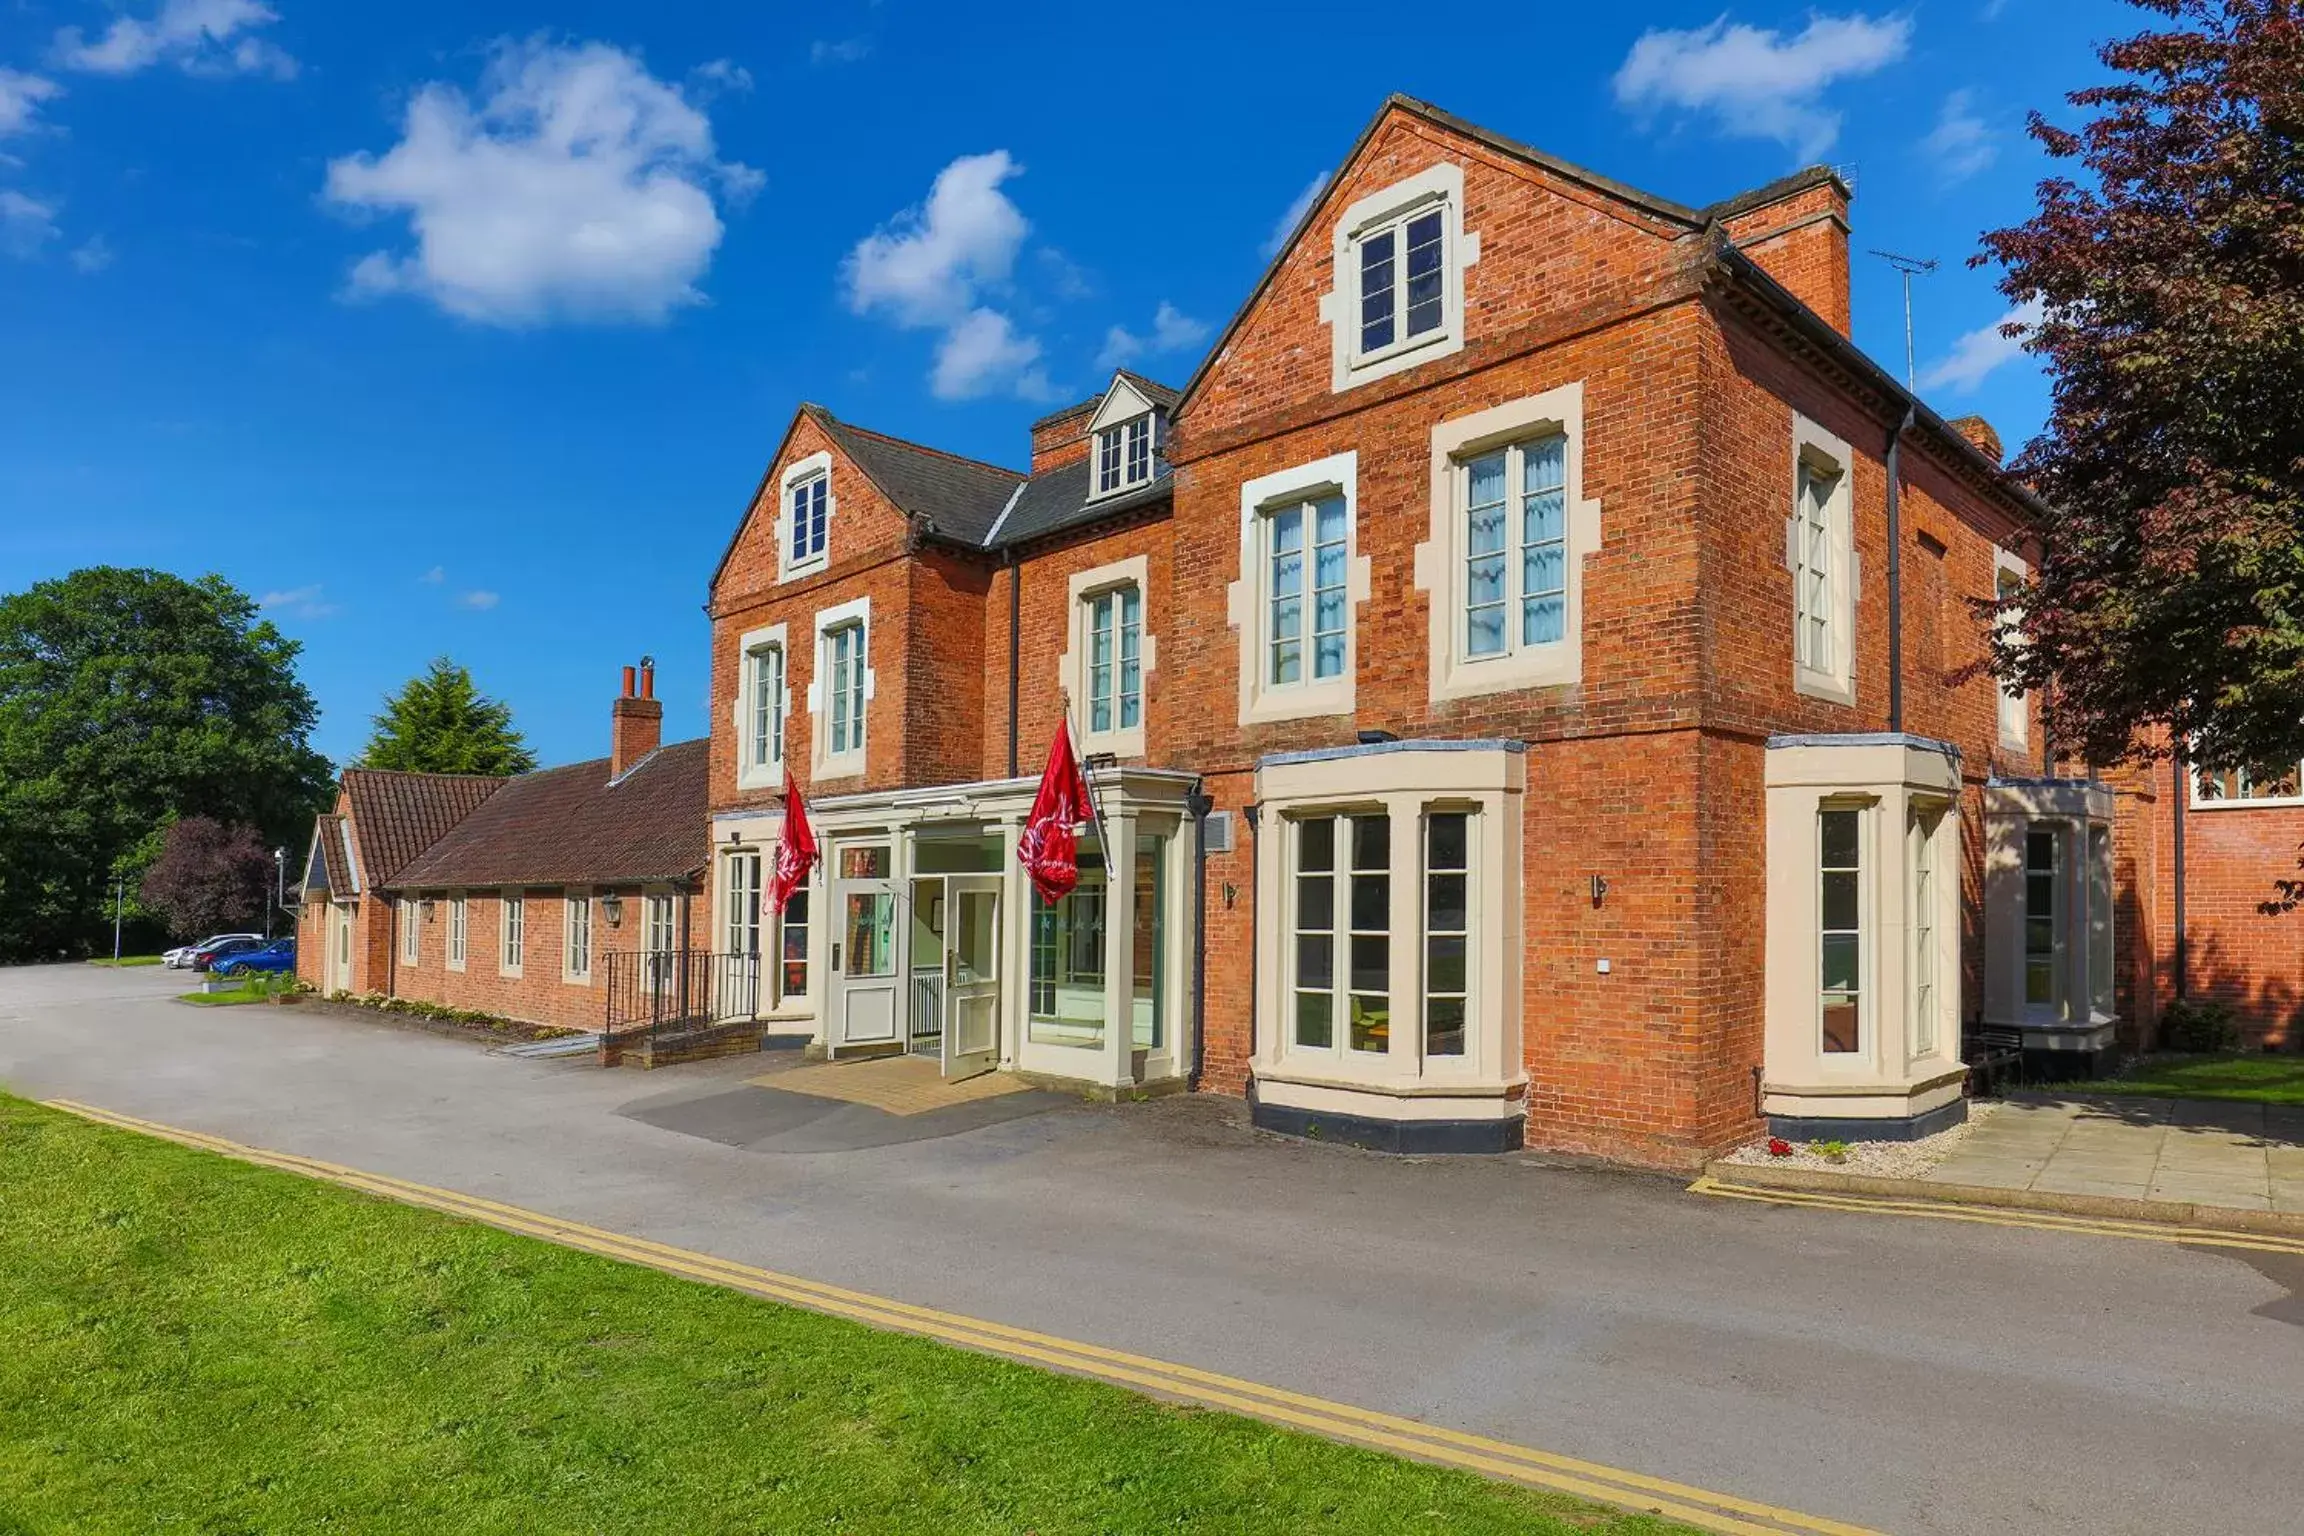 Street view in Muthu Clumber Park Hotel and Spa